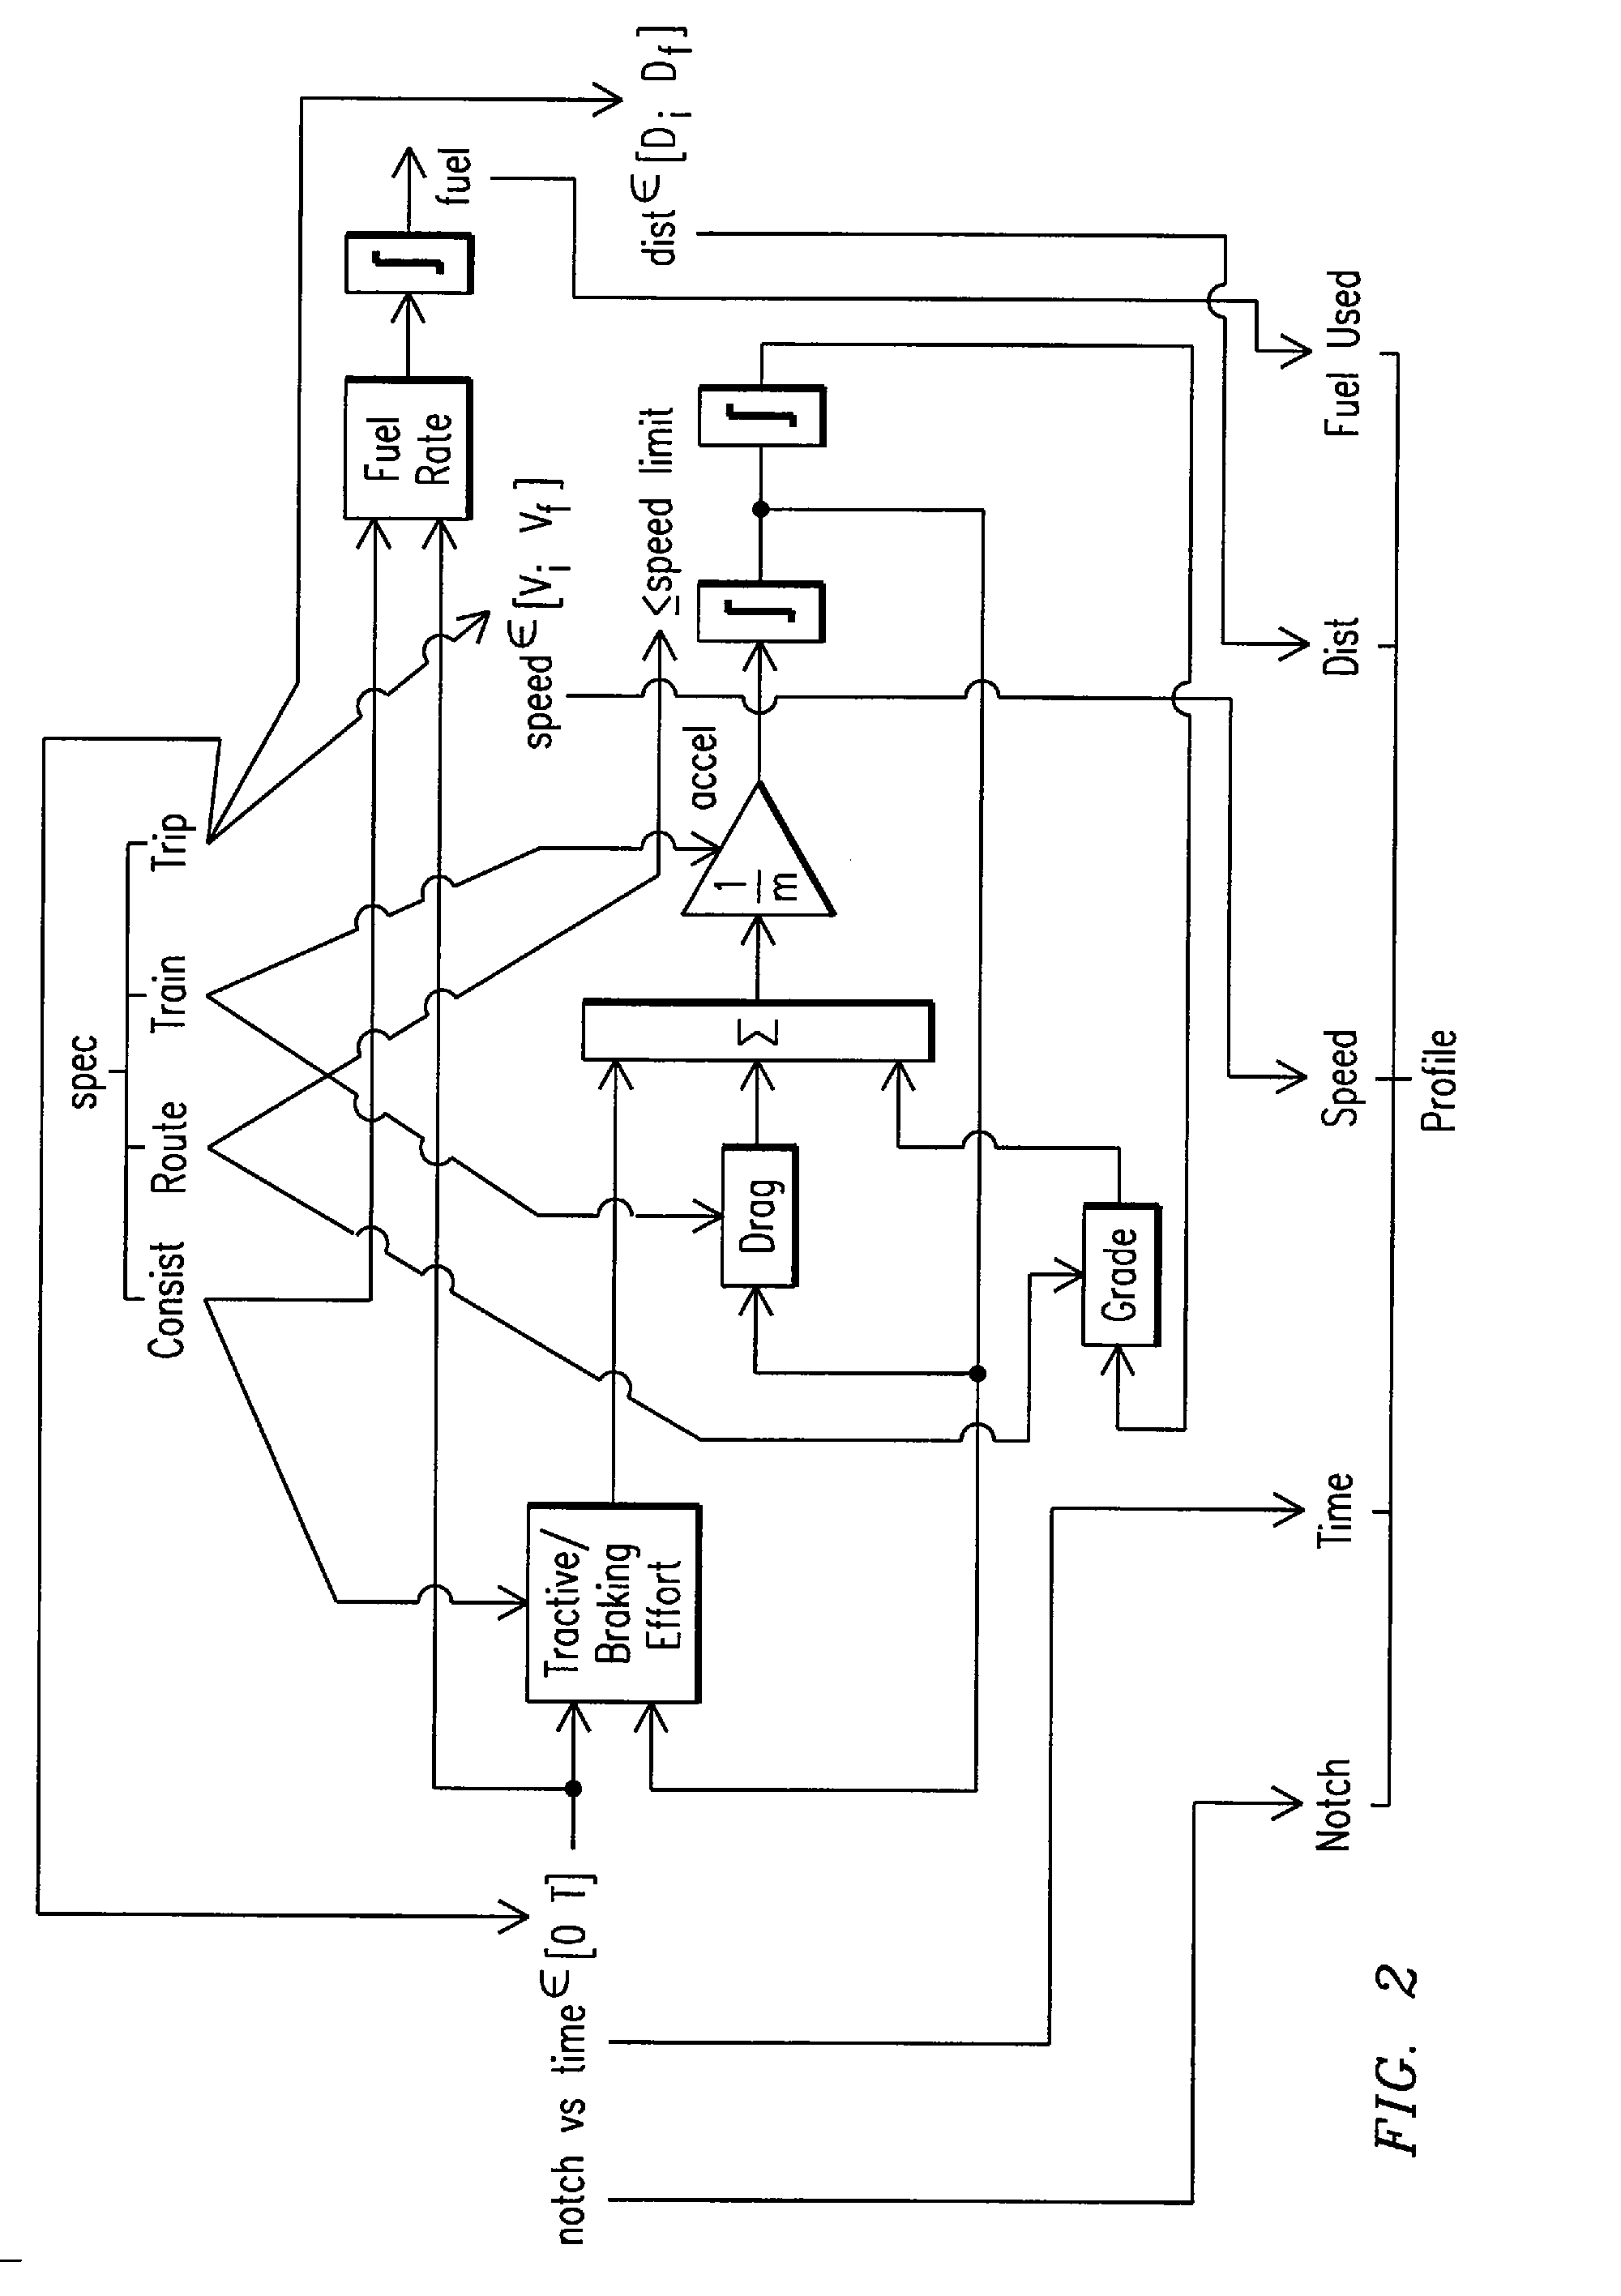 Method, system and computer software code for trip optimization with train/track database augmentation